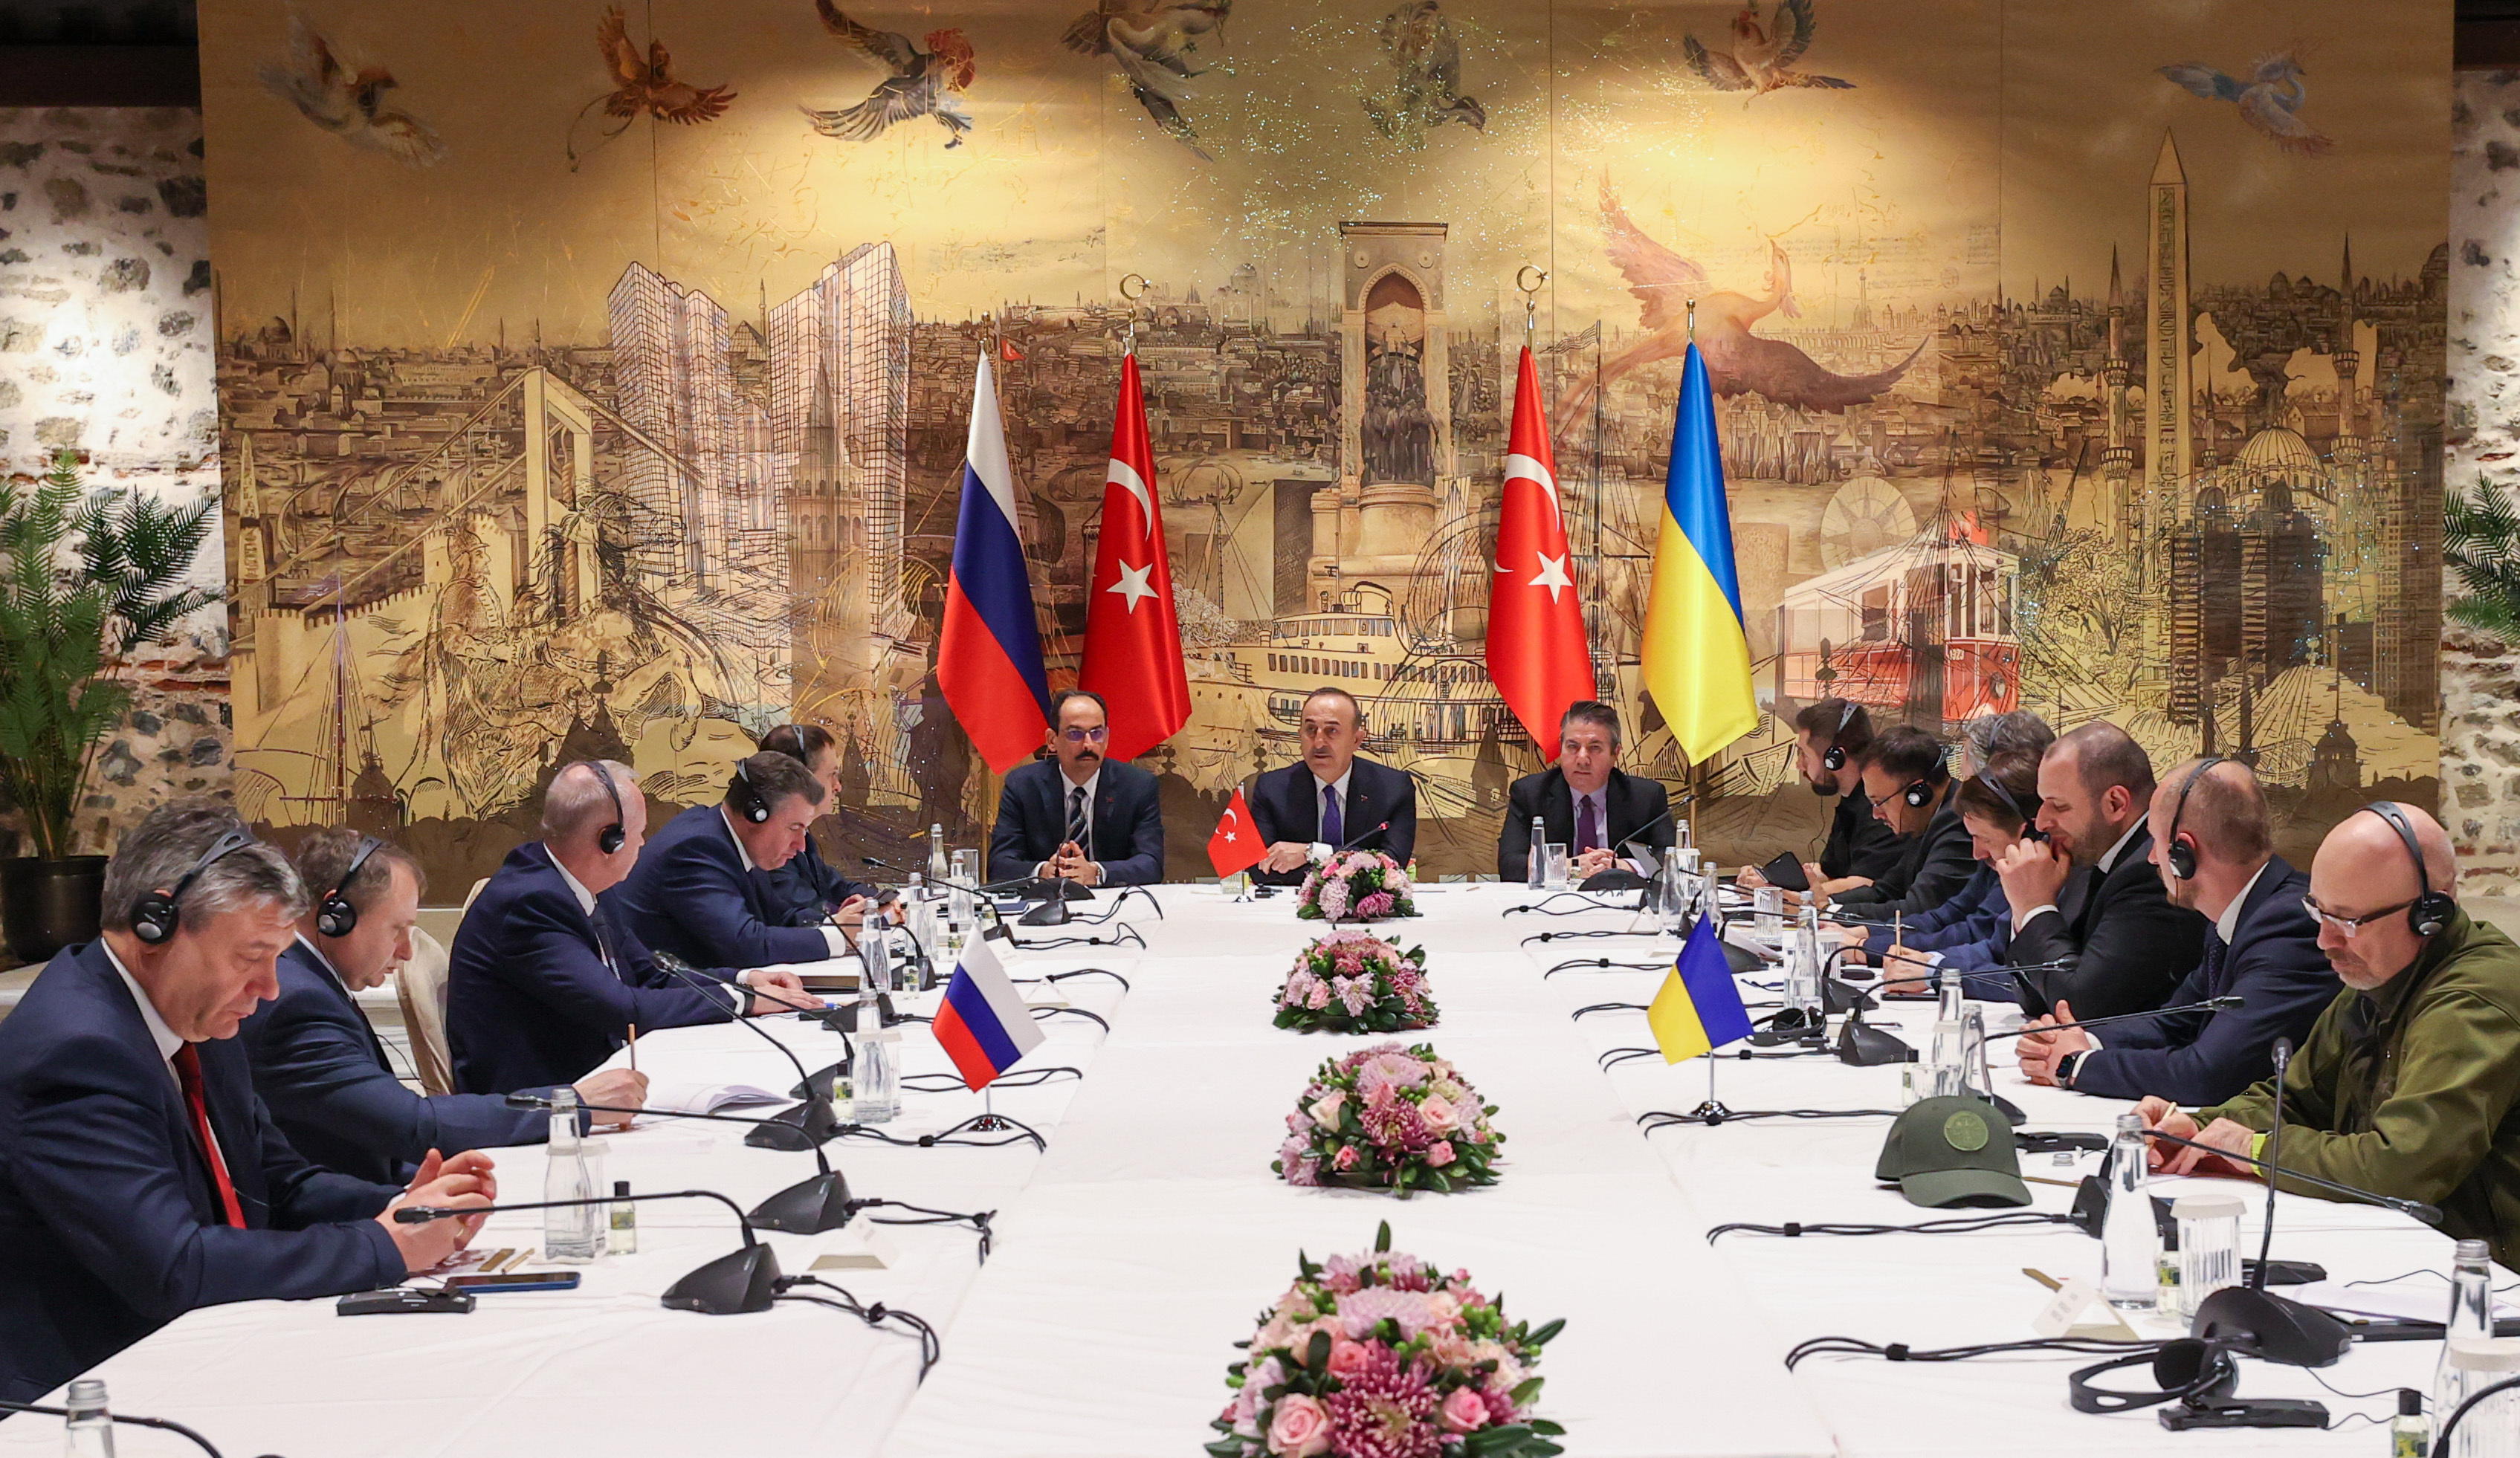 Turkish Foreign Minister Mevlut Cavusoglu, center, gives a thank you speech during the peace talks between delegations from Russia and Ukraine at Dolmabahce Presidential Office in Istanbul, Turkey, on March 29.